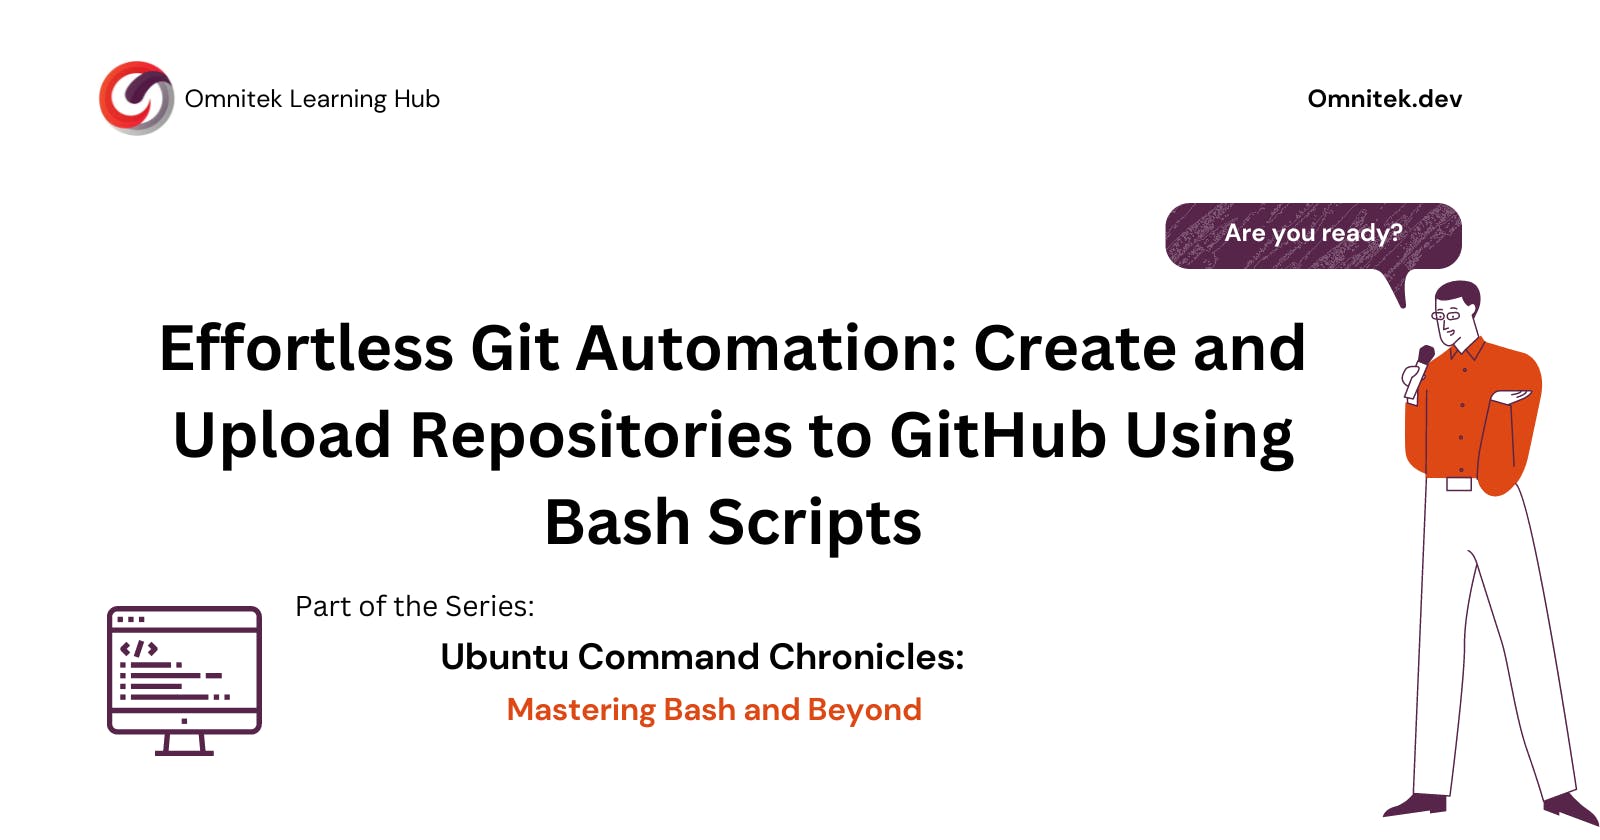 Effortless Git Automation: Create and Upload Repositories to GitHub Using Bash Scripts